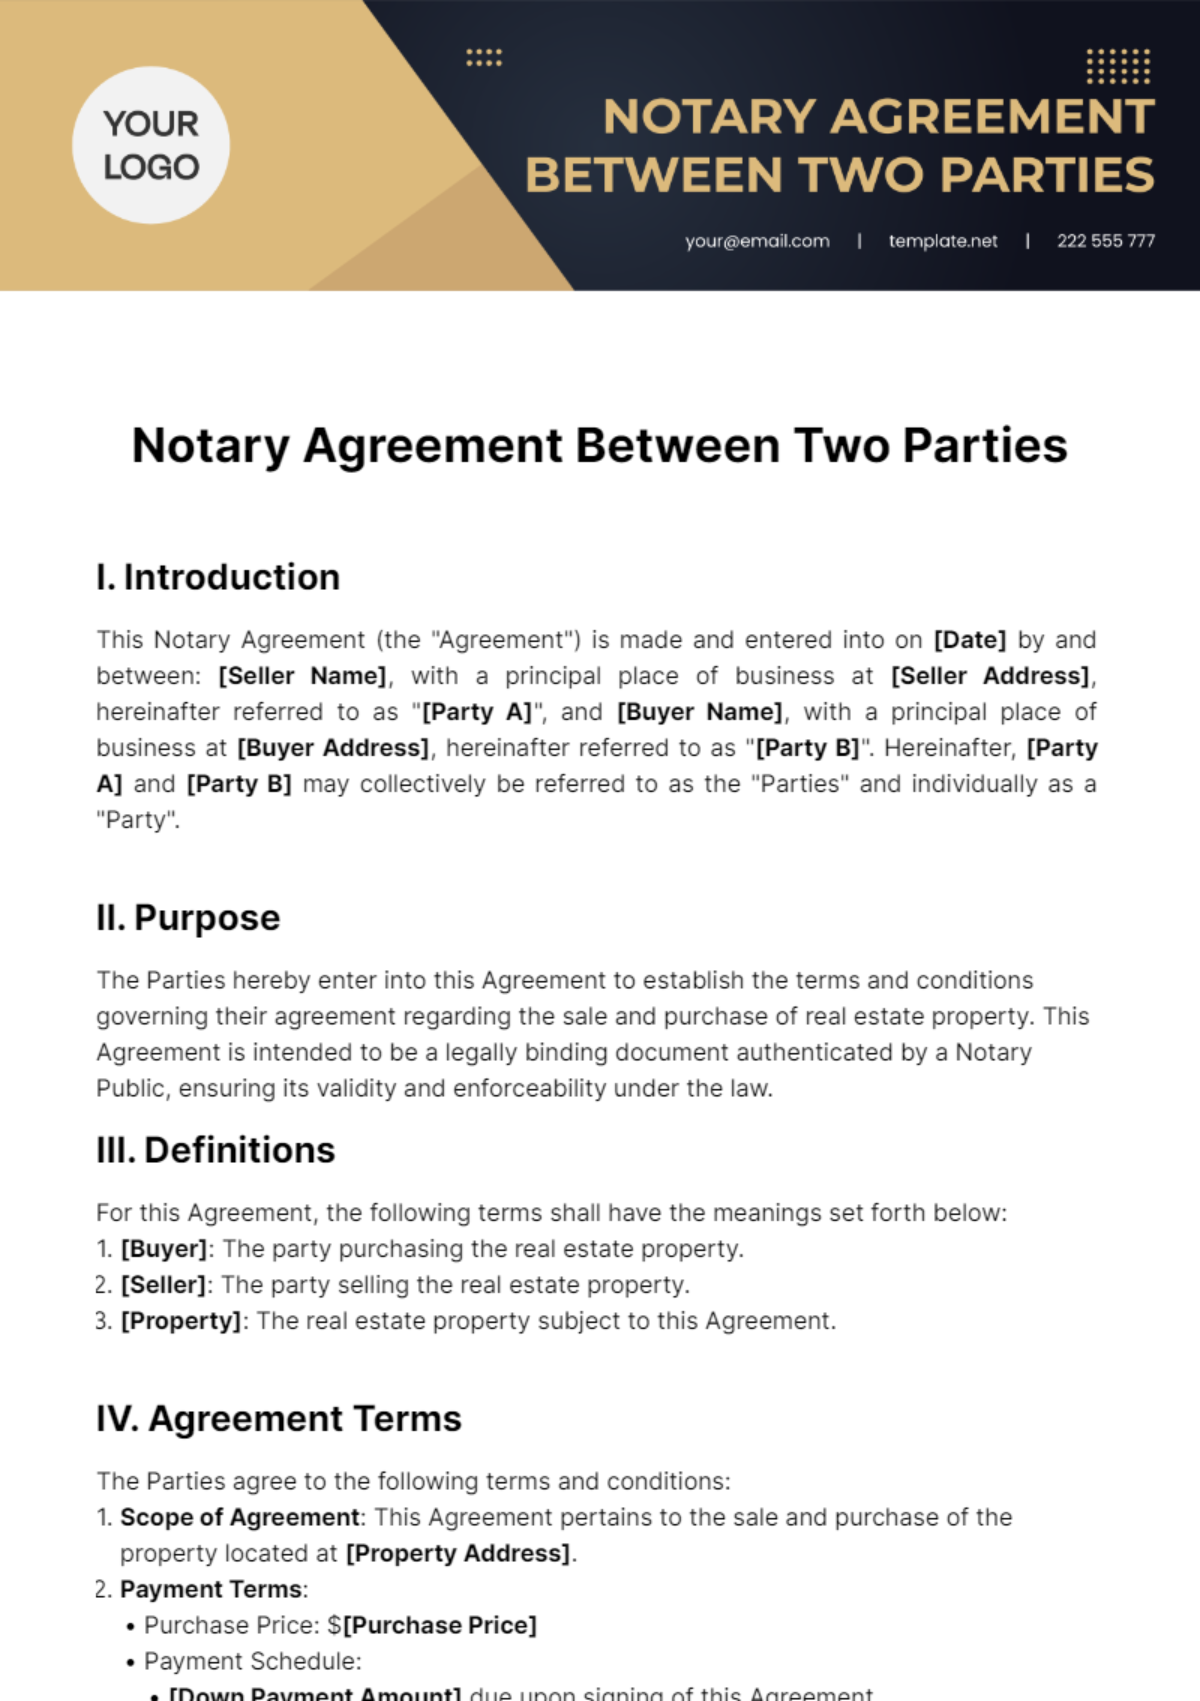 Free Notary Agreement Between Two Parties Template